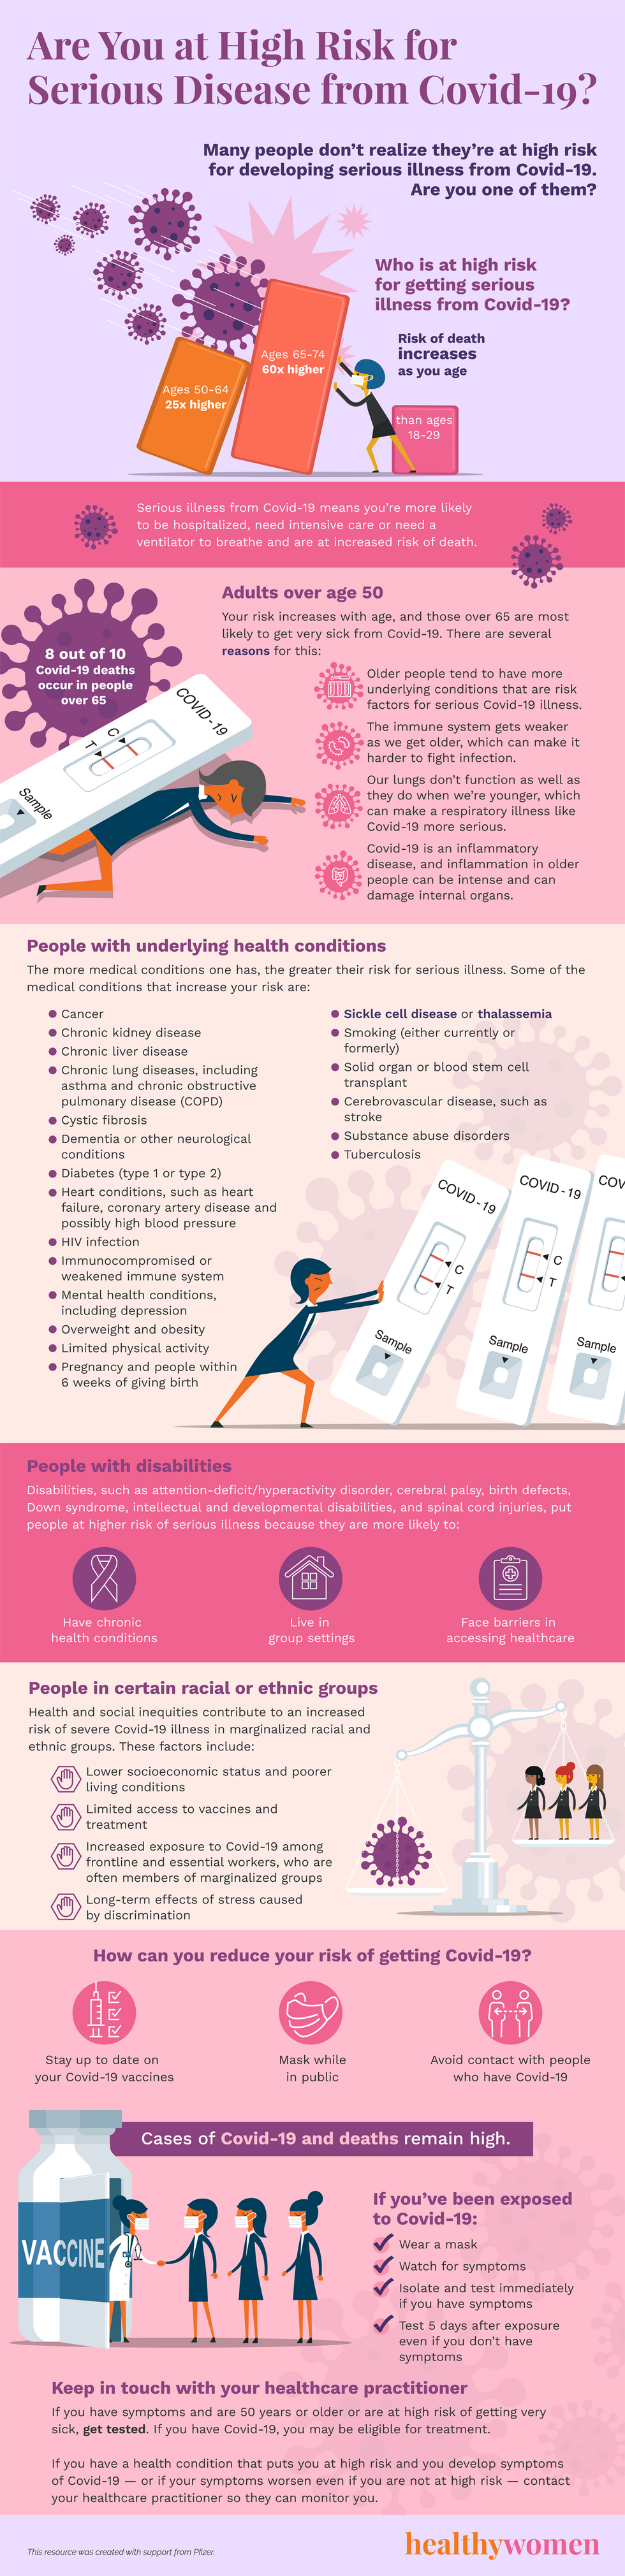 Infographic Are You at High Risk for Serious Disease from Covid-19. Click the image to open the PDF